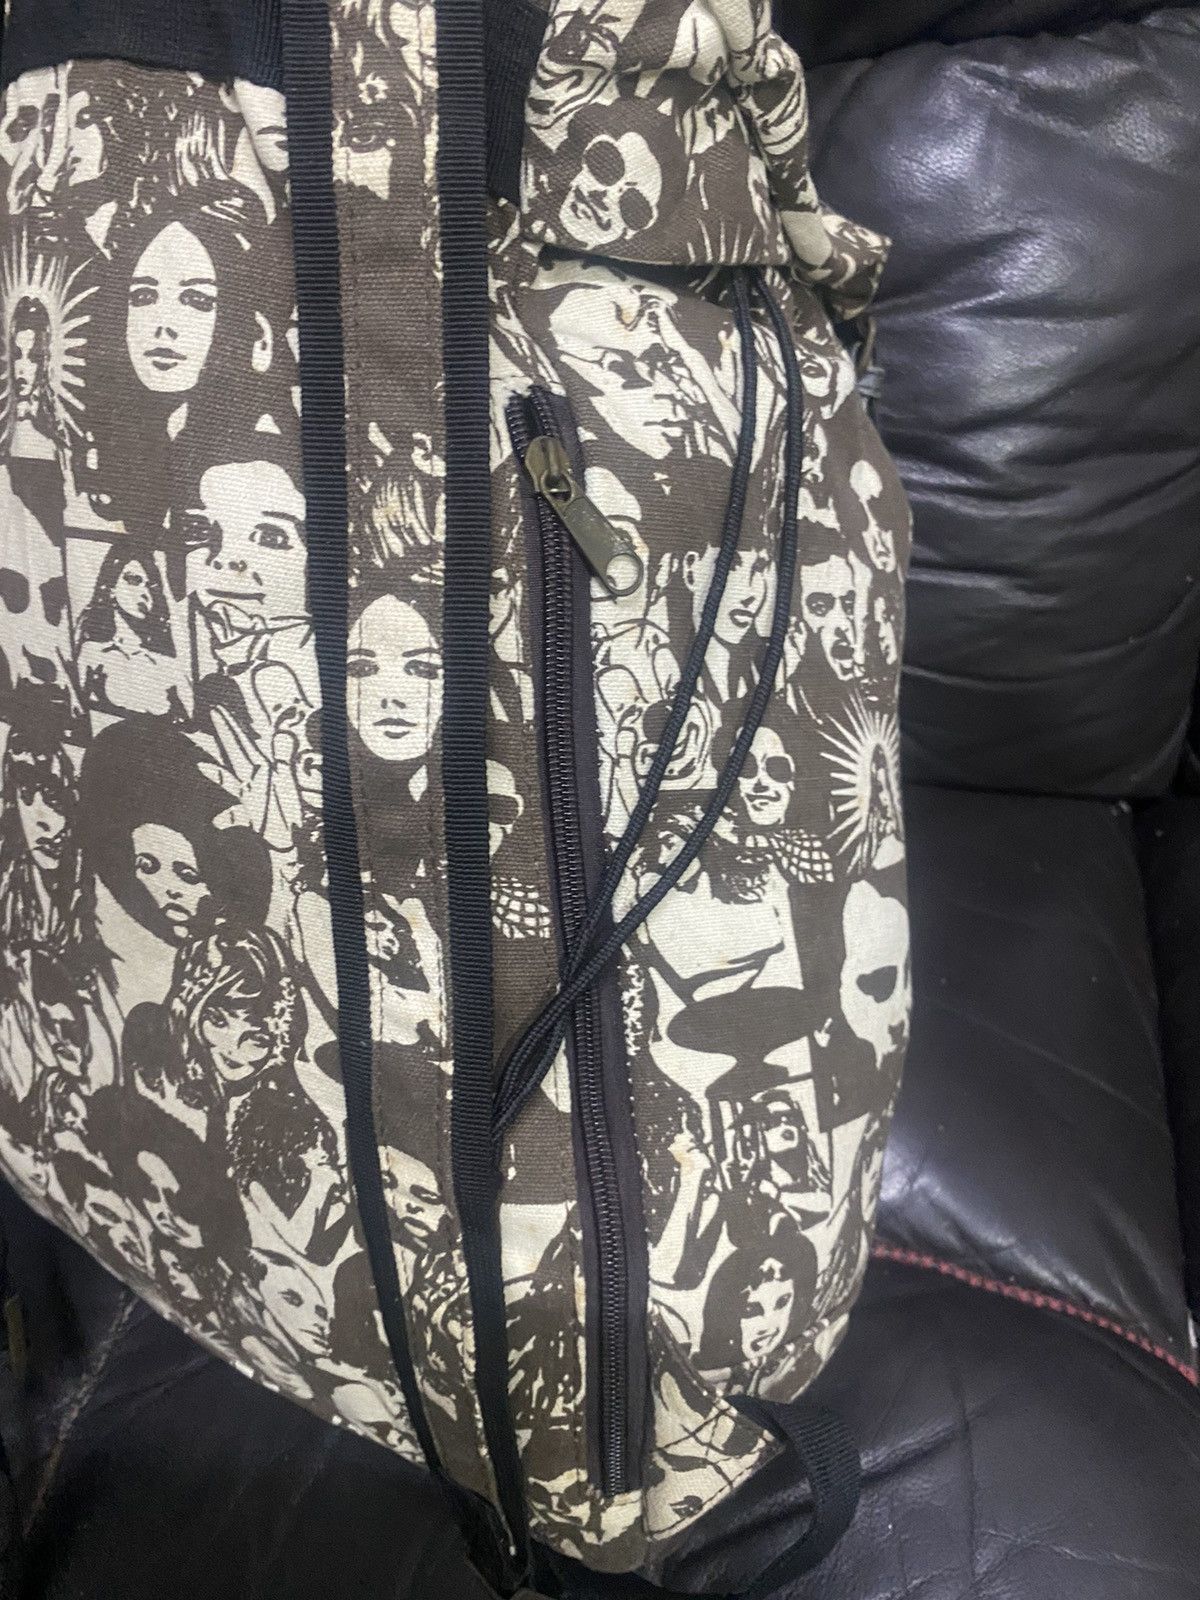 Face Pictures Backpack - 6